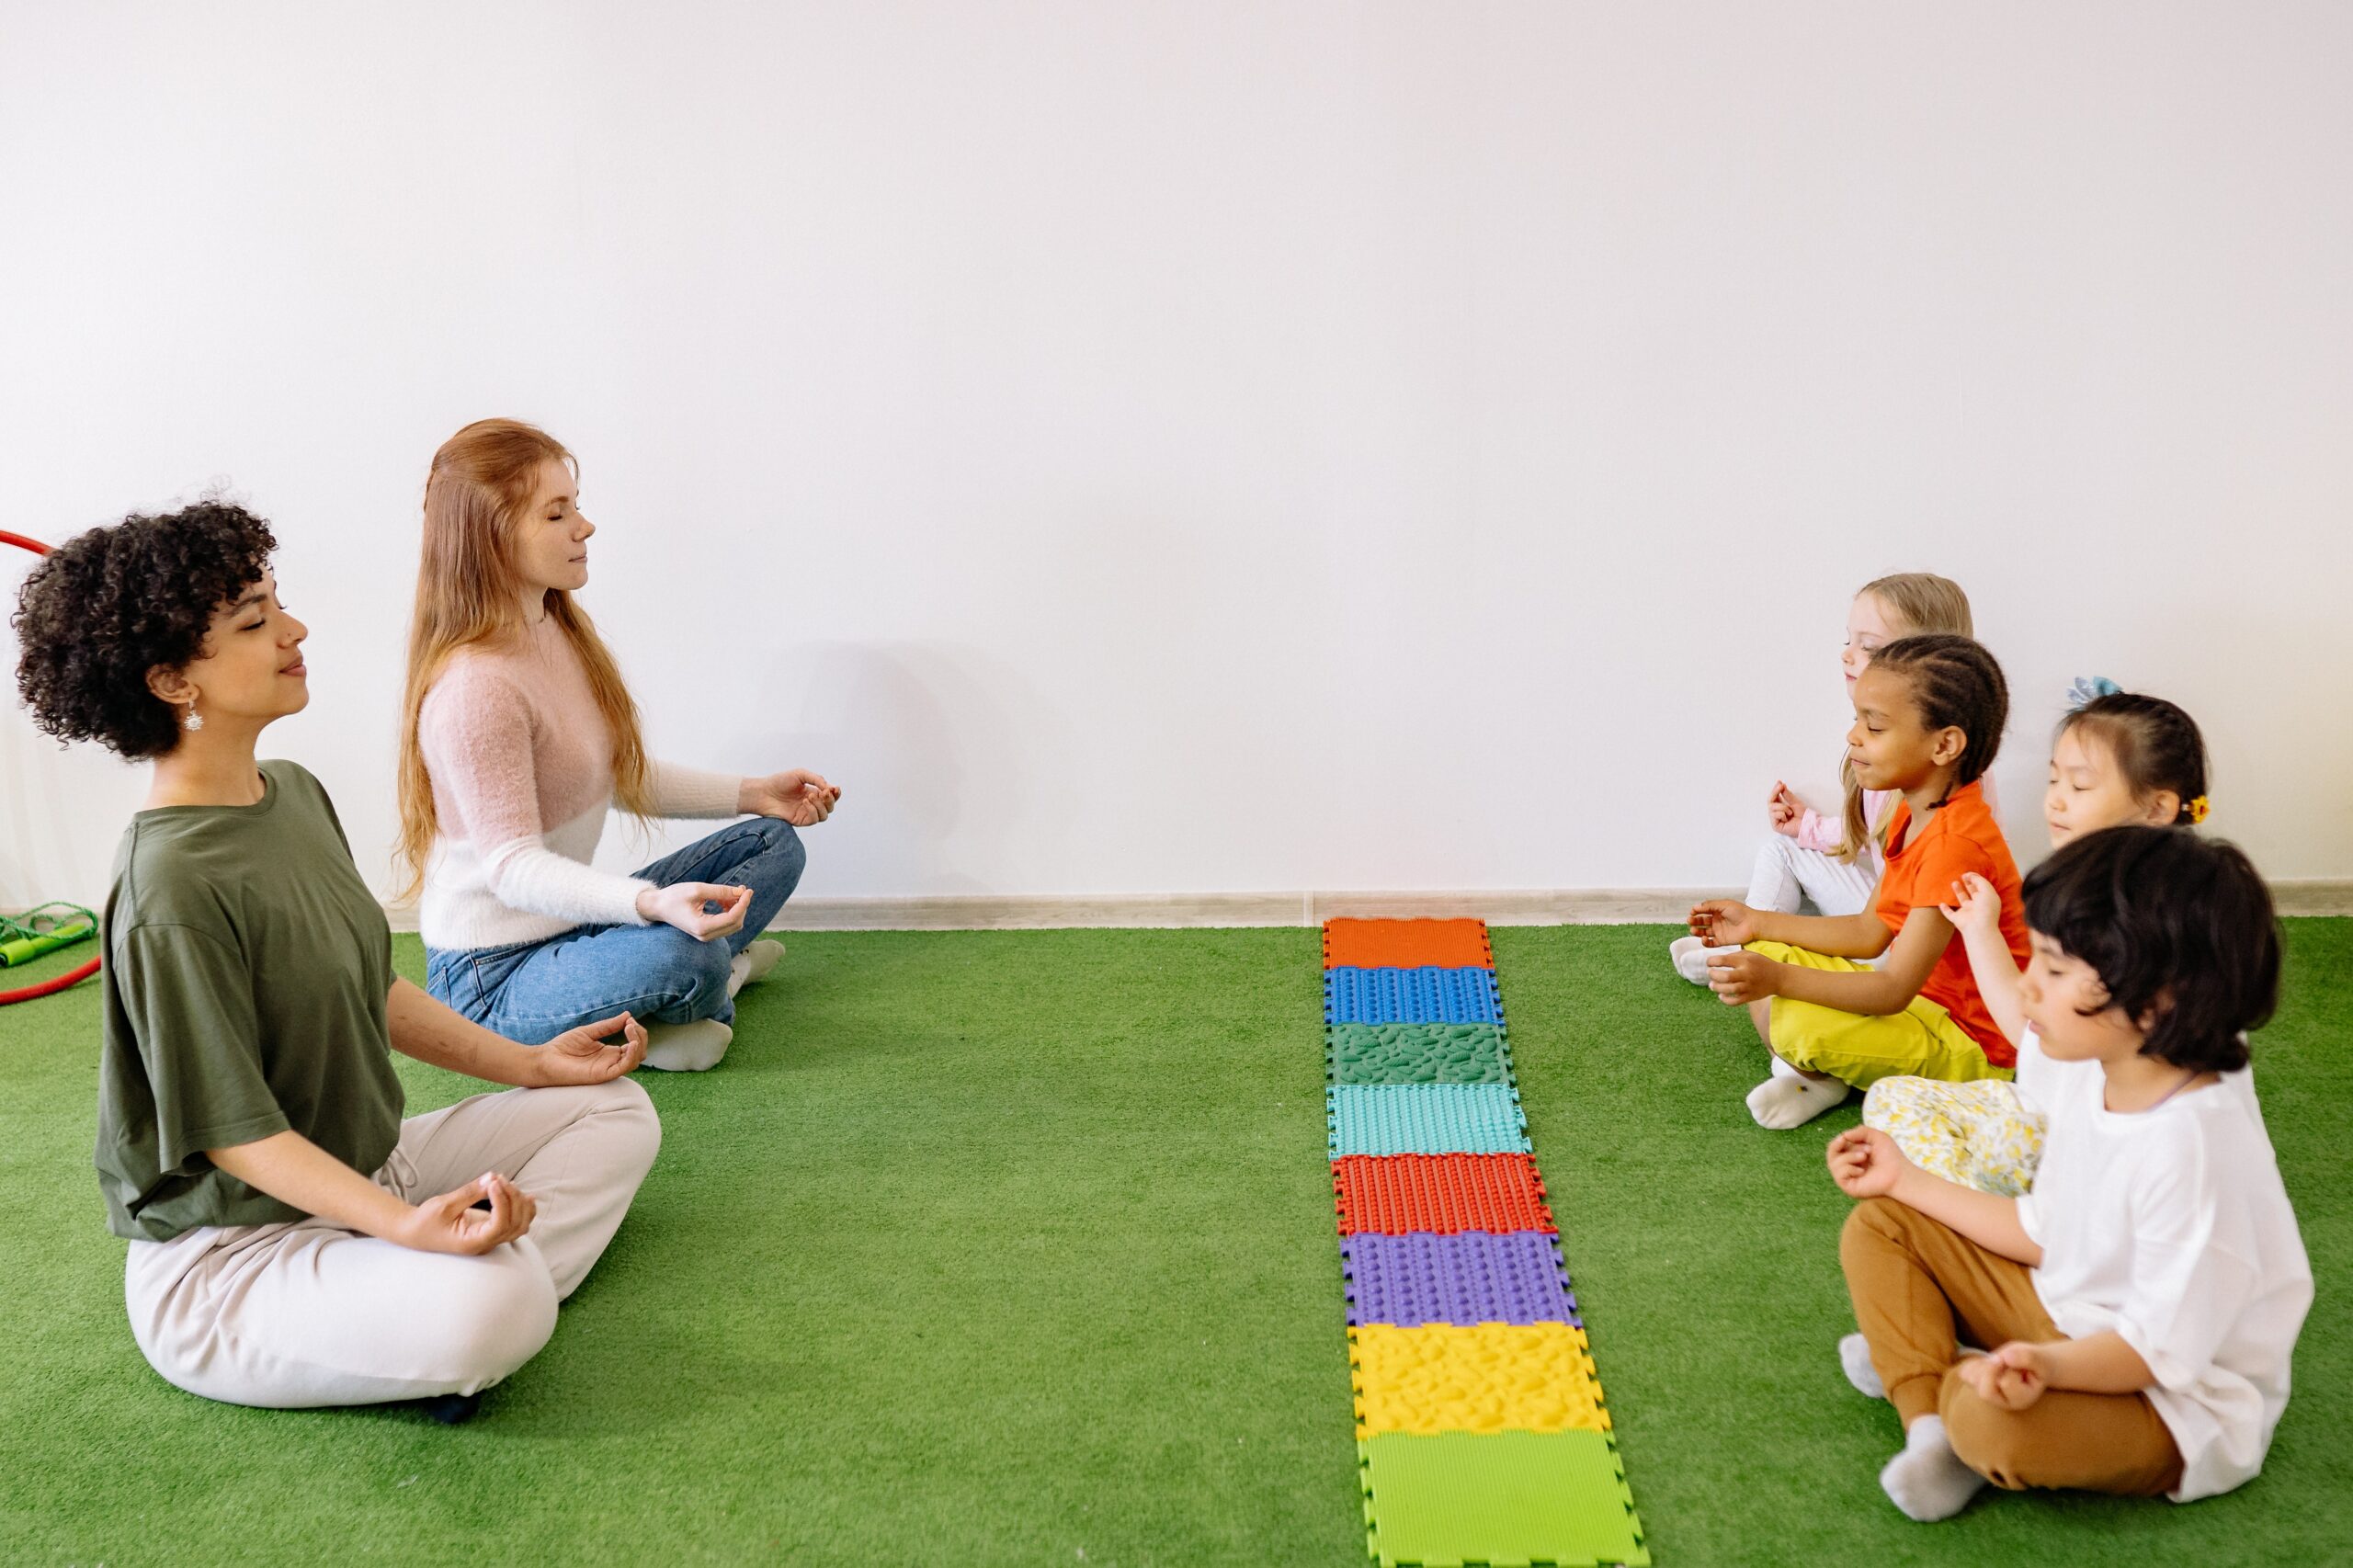 5 Tips to Engage Kids in Yoga: Building a Joyful Practice